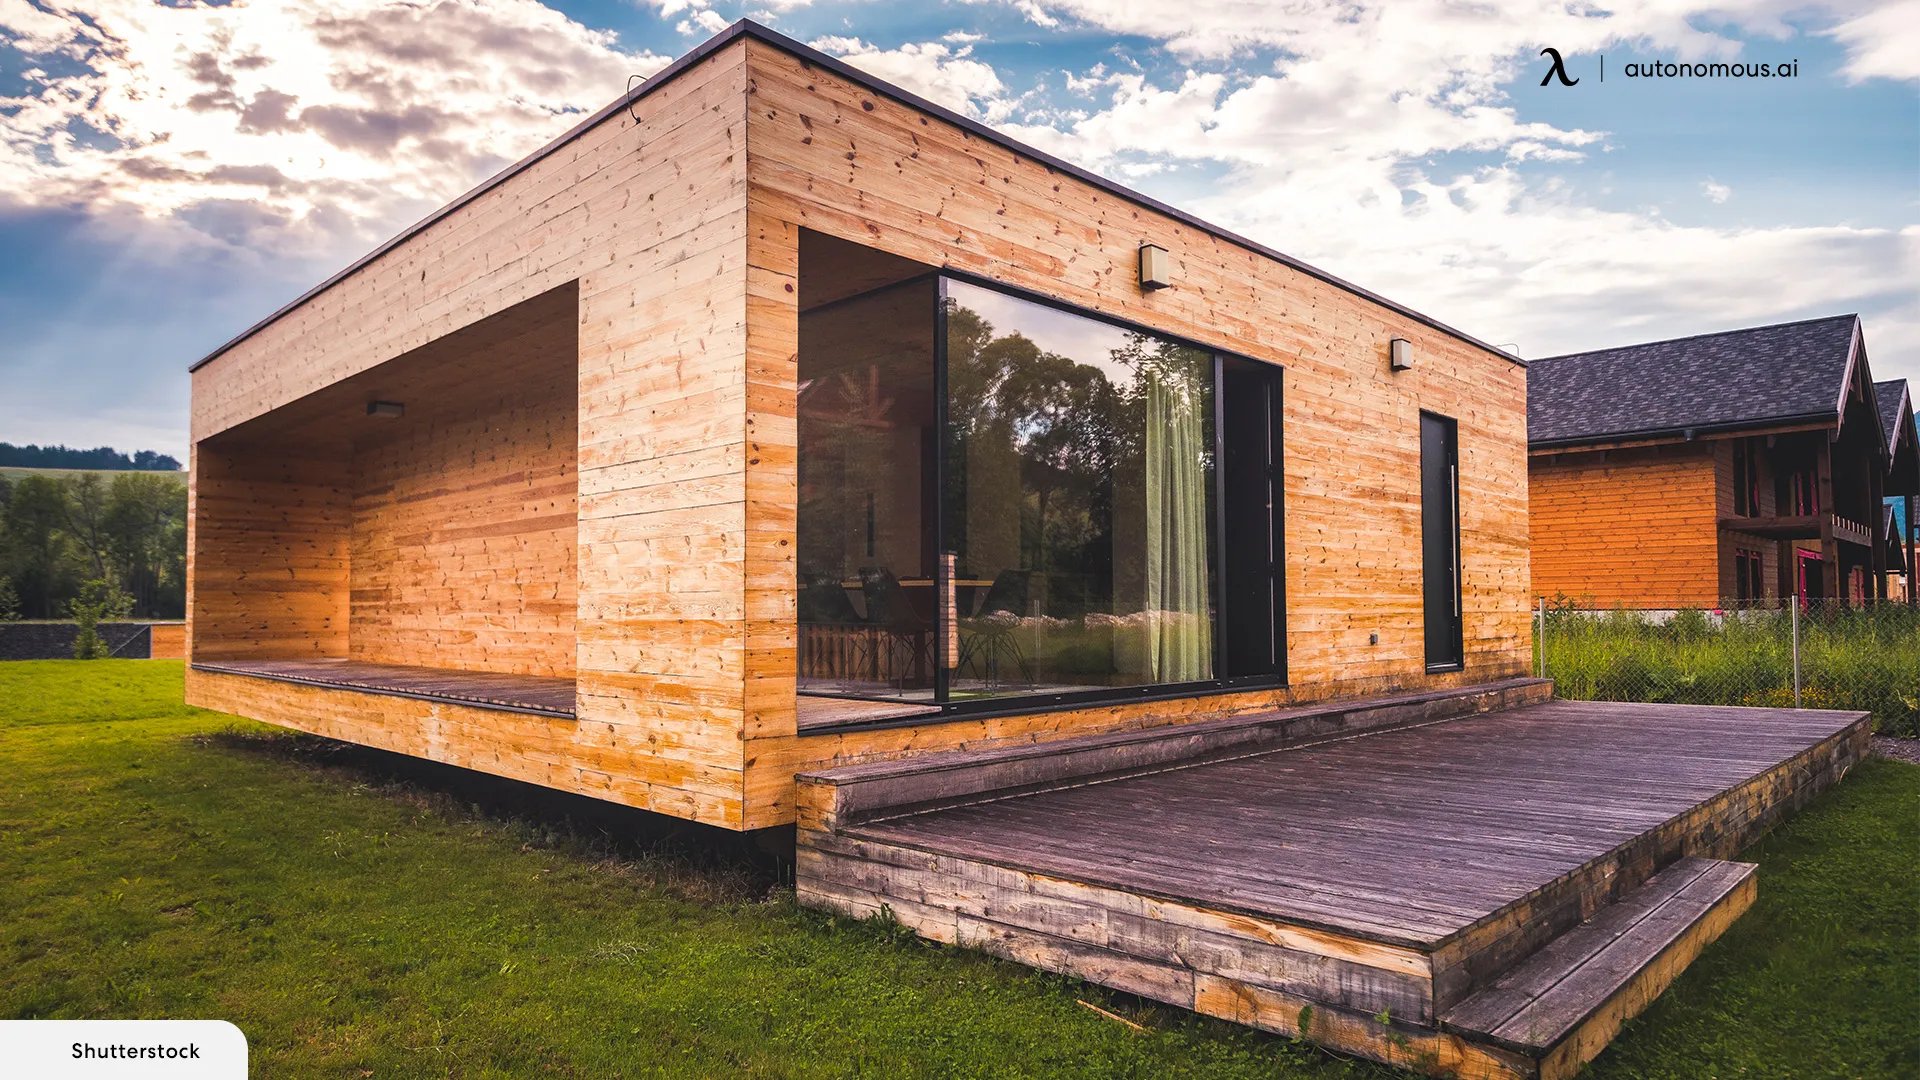 What is a Prefab Cabin?